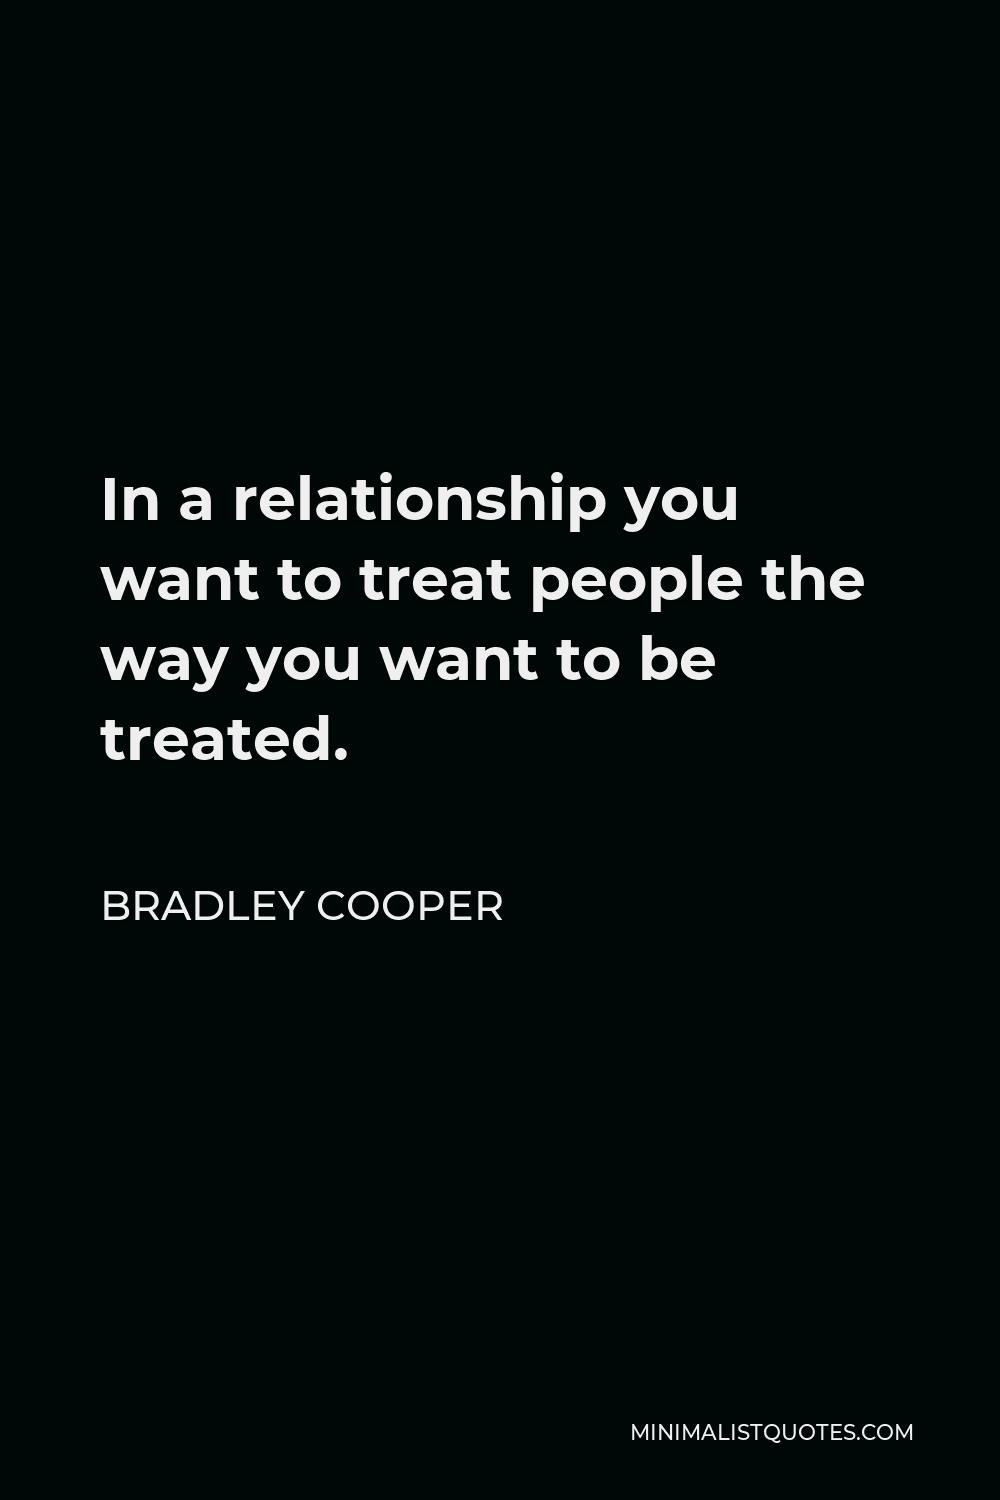 Bradley Cooper Quote - In a relationship you want to treat people the way you want to be treated.